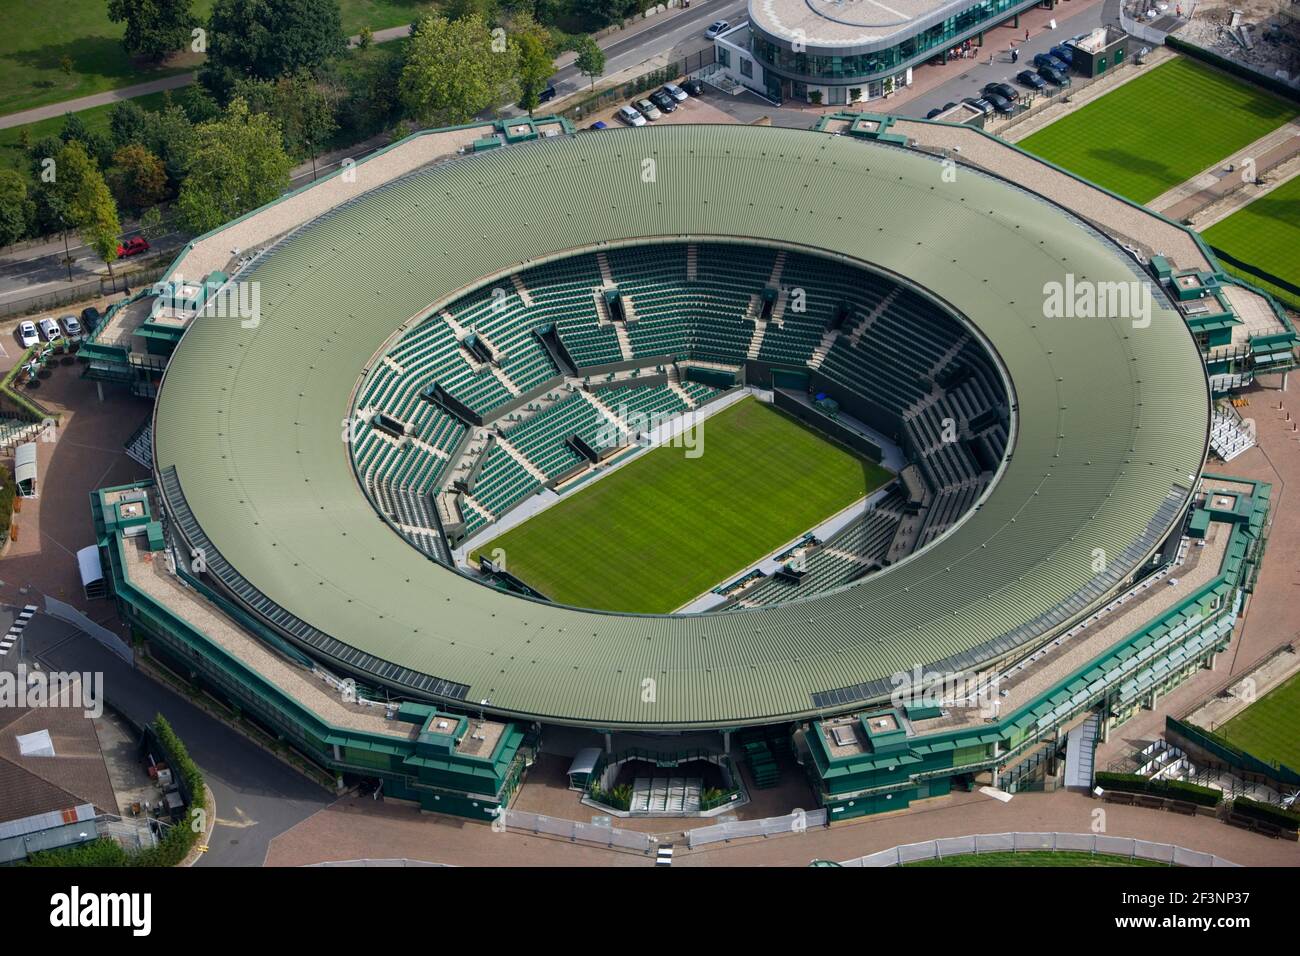 No.1 COURT, All England Lawn Tennis and Croquet Club, Wimbledon, London.  Opened in 1997, No. 1 Court is the next most prestigious tennis court at  Wimb Stock Photo - Alamy